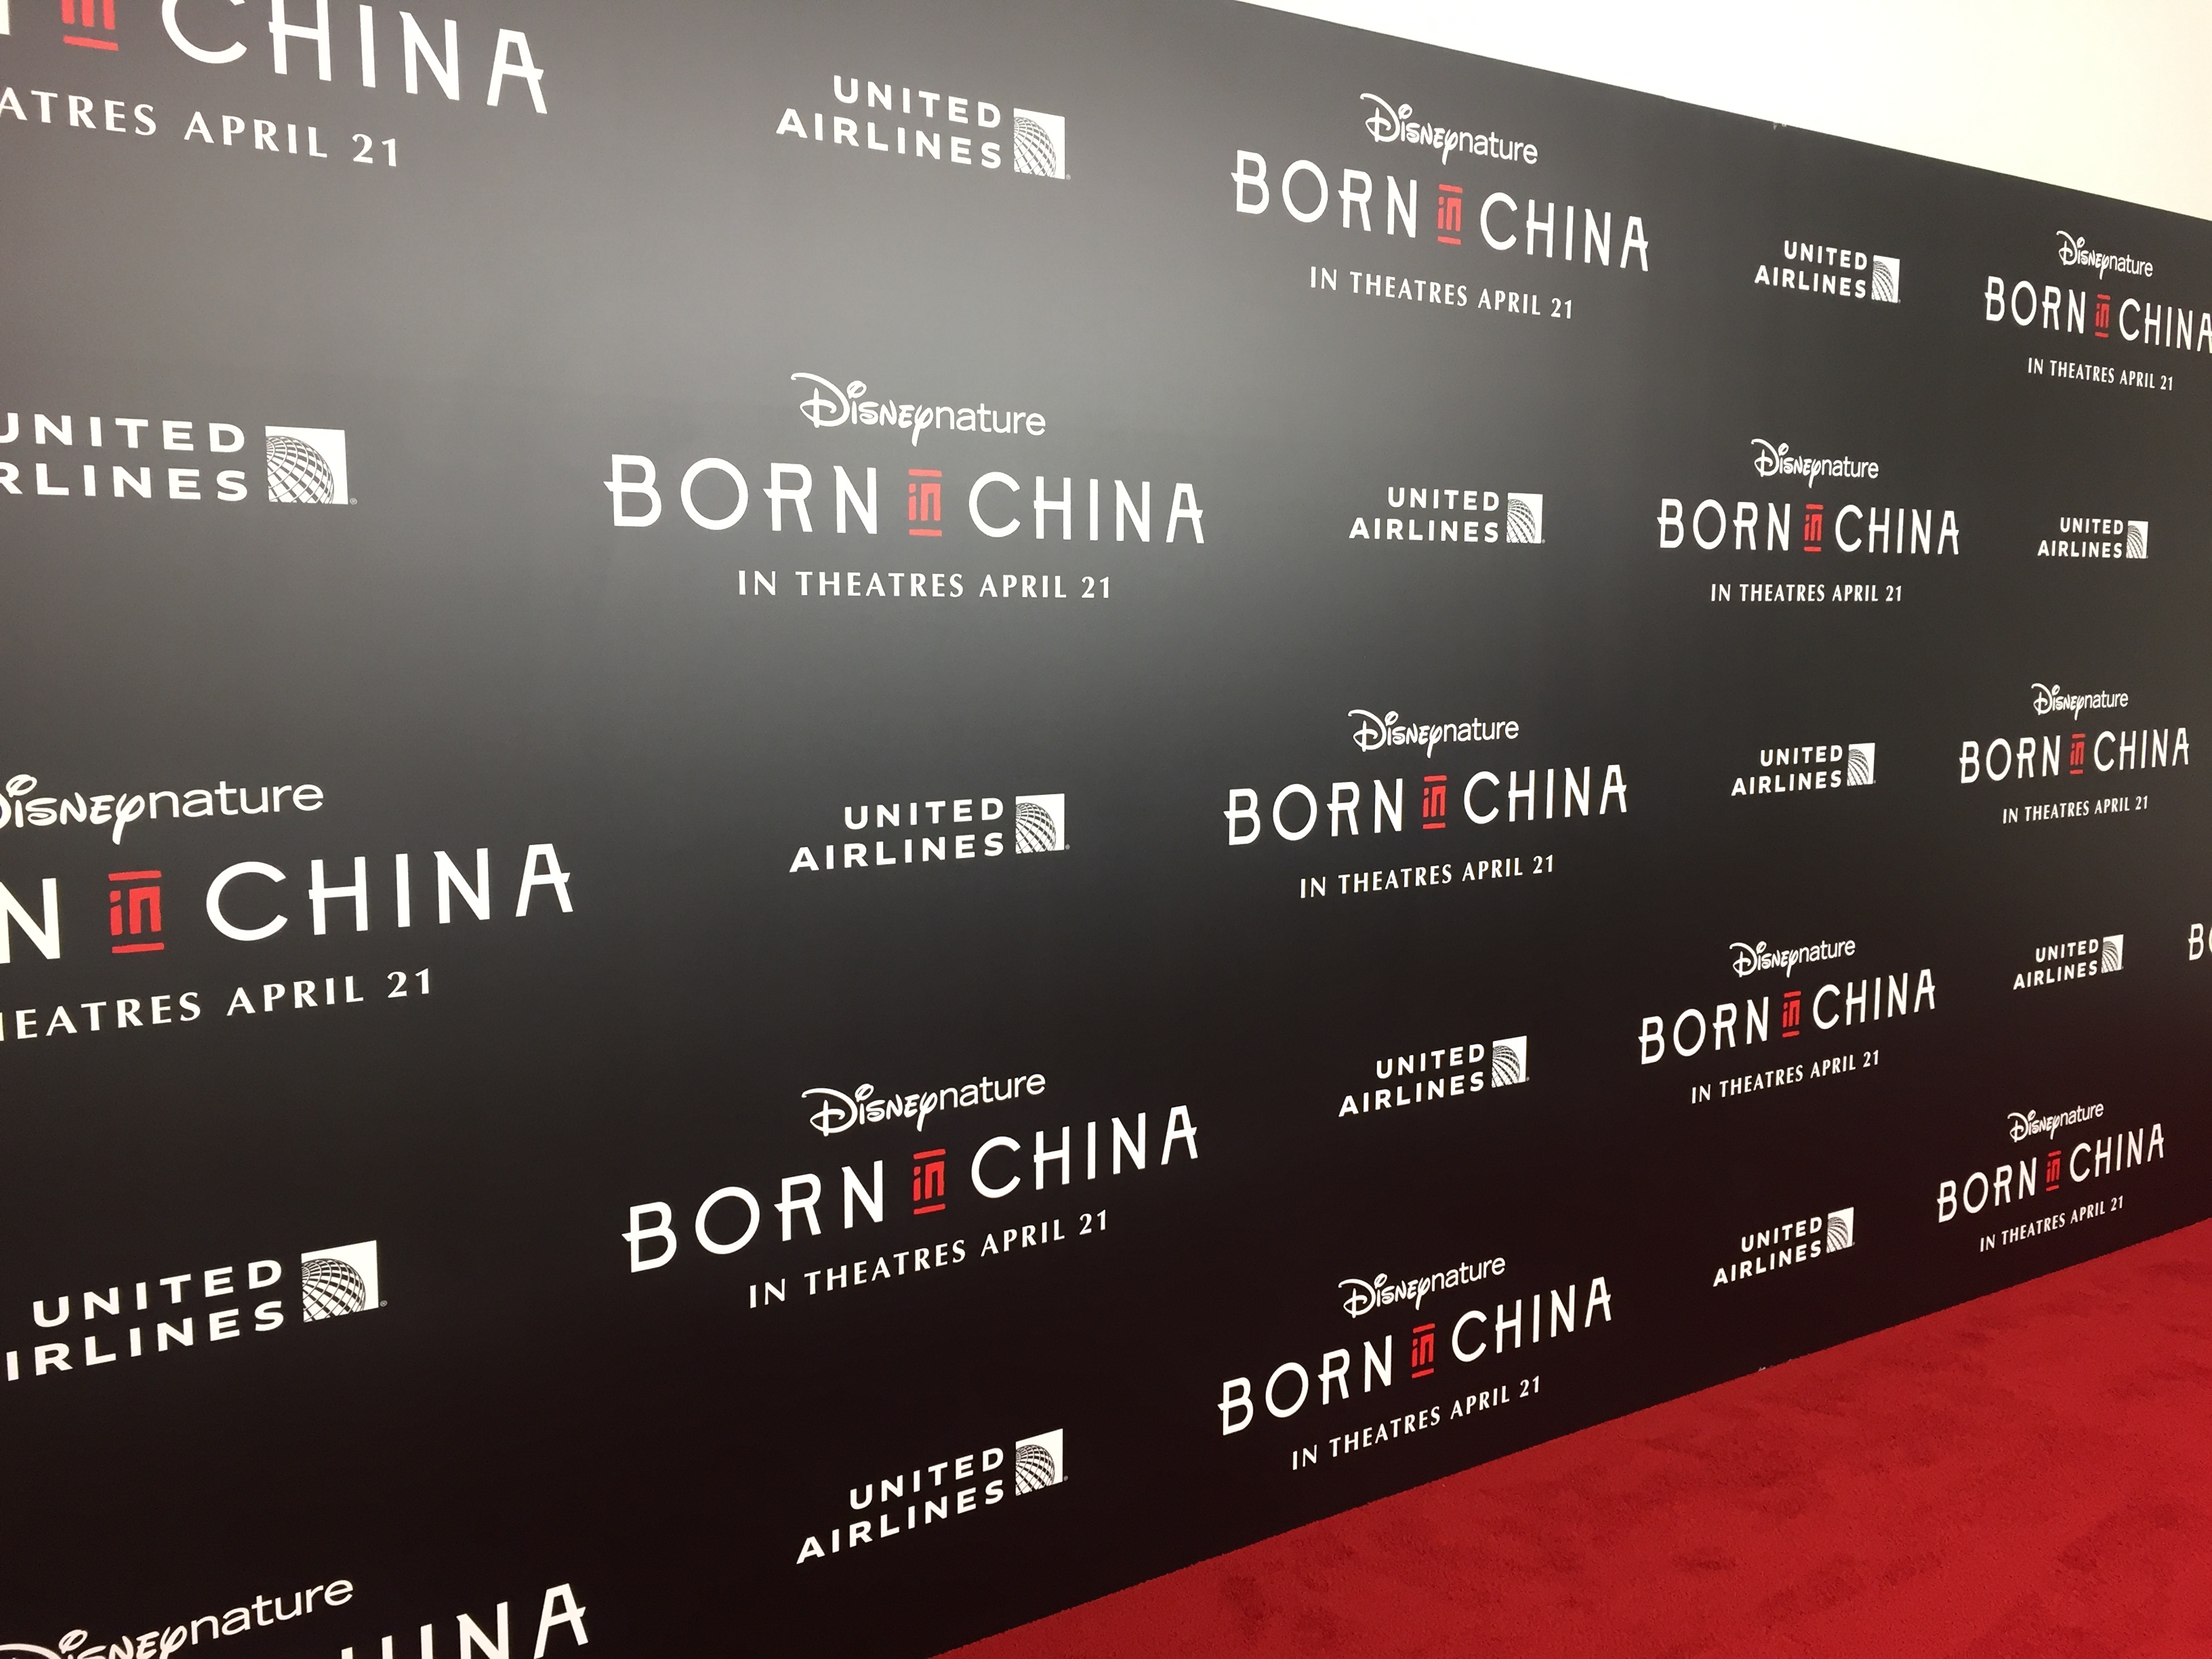 Disneynature's "Born in China": Interviews and Photos from the Red Carpet Premiere